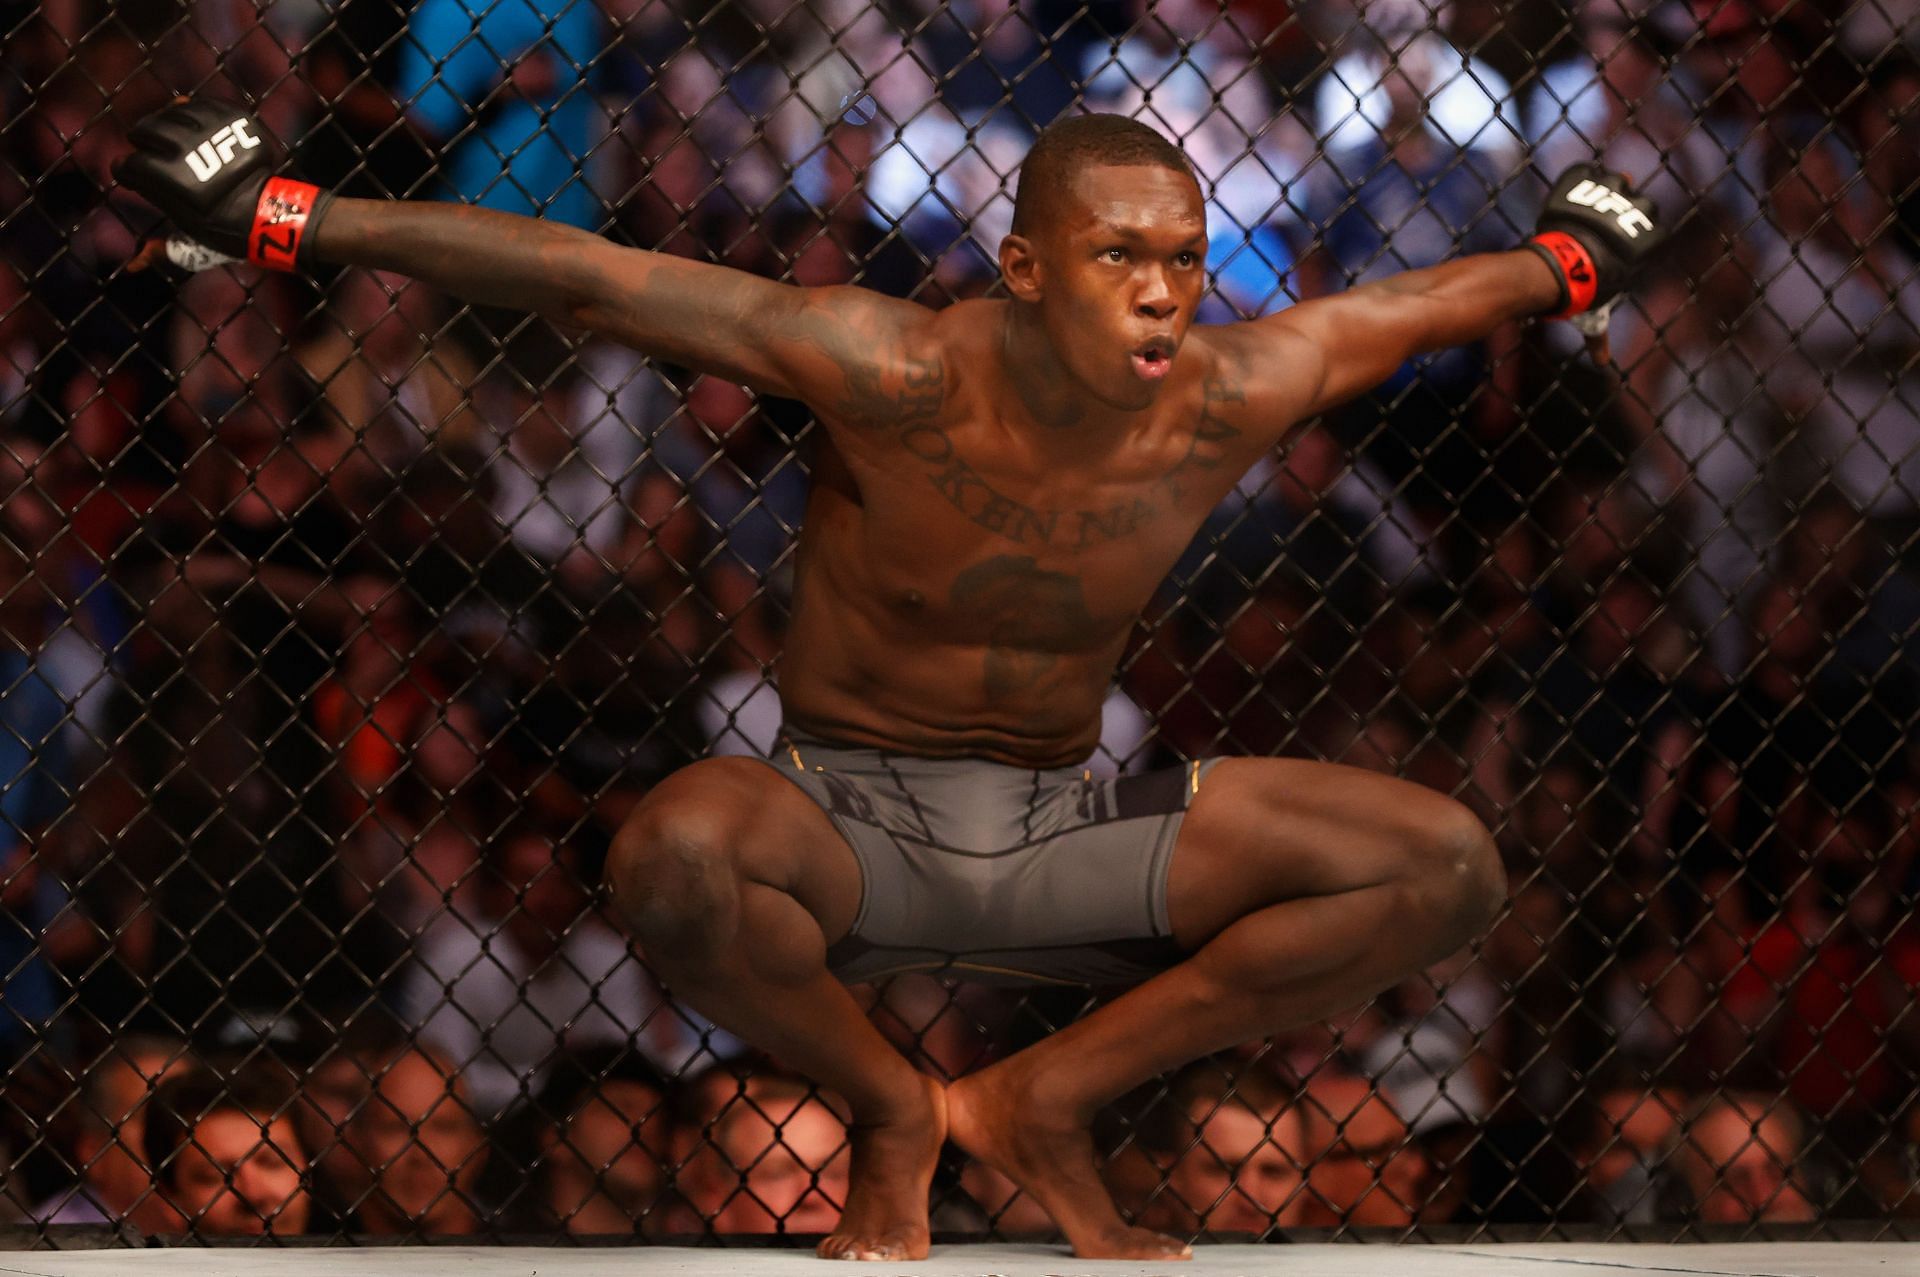 Israel Adesanya is as close as any fighter to matching the popularity of Conor McGregor